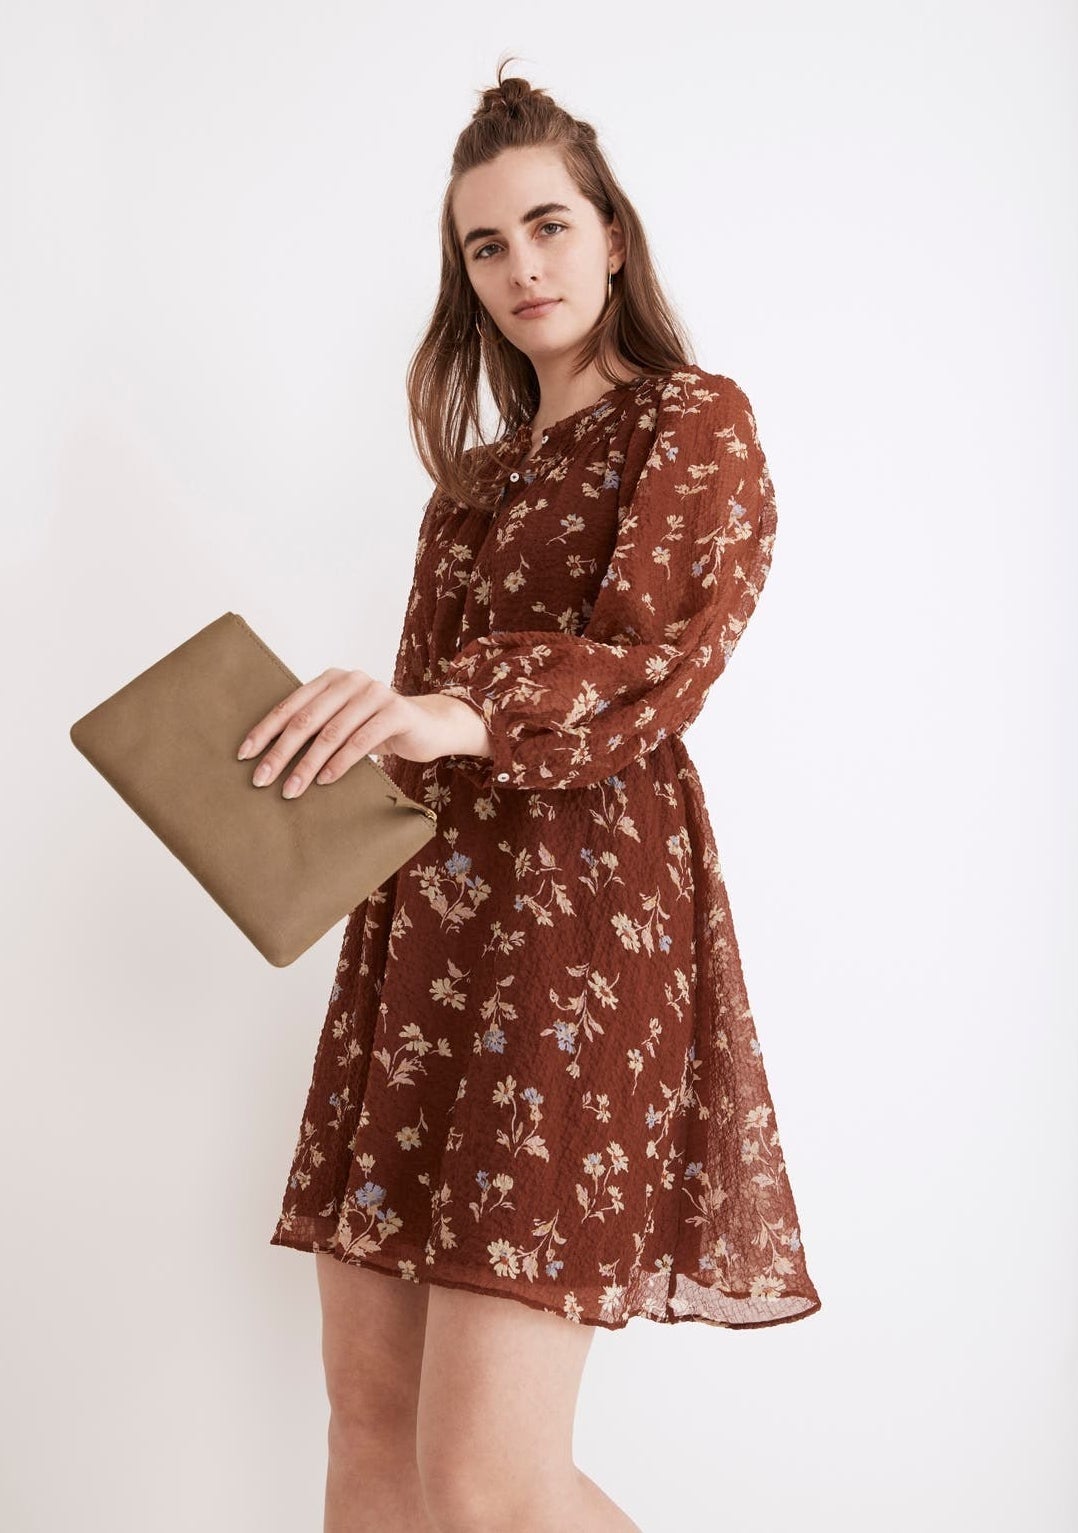 Model in a dress holding out the leather pouch